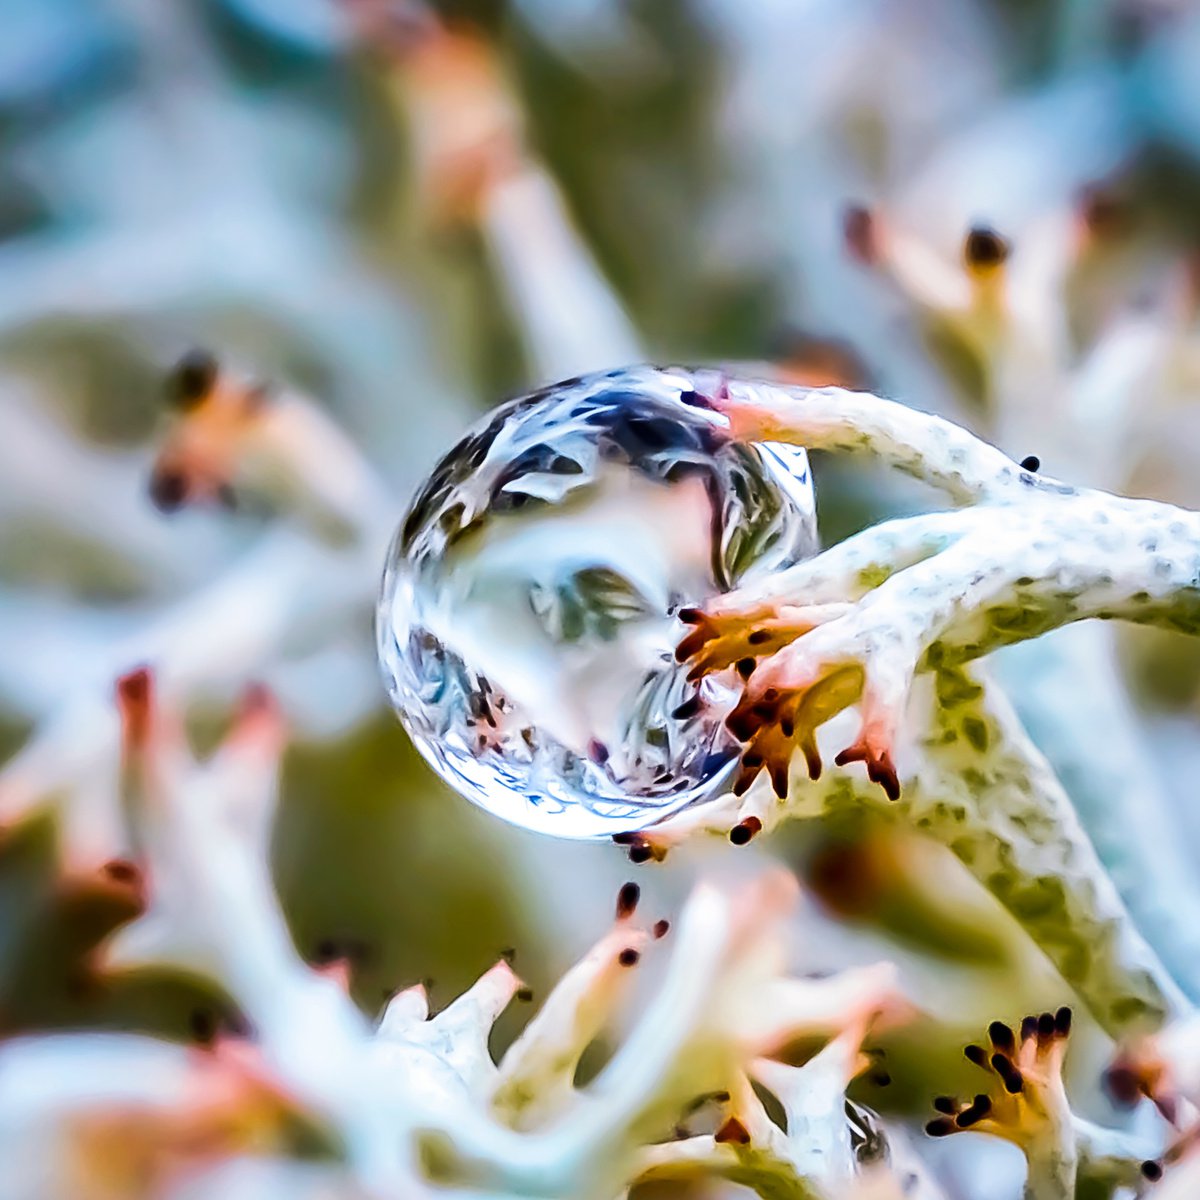 INSIDE THE DROP - MACRO PHOTO OF A DROP IN LICHENS, LIMITED EDITION PRINT, SQUARE by Inna Etuvgi